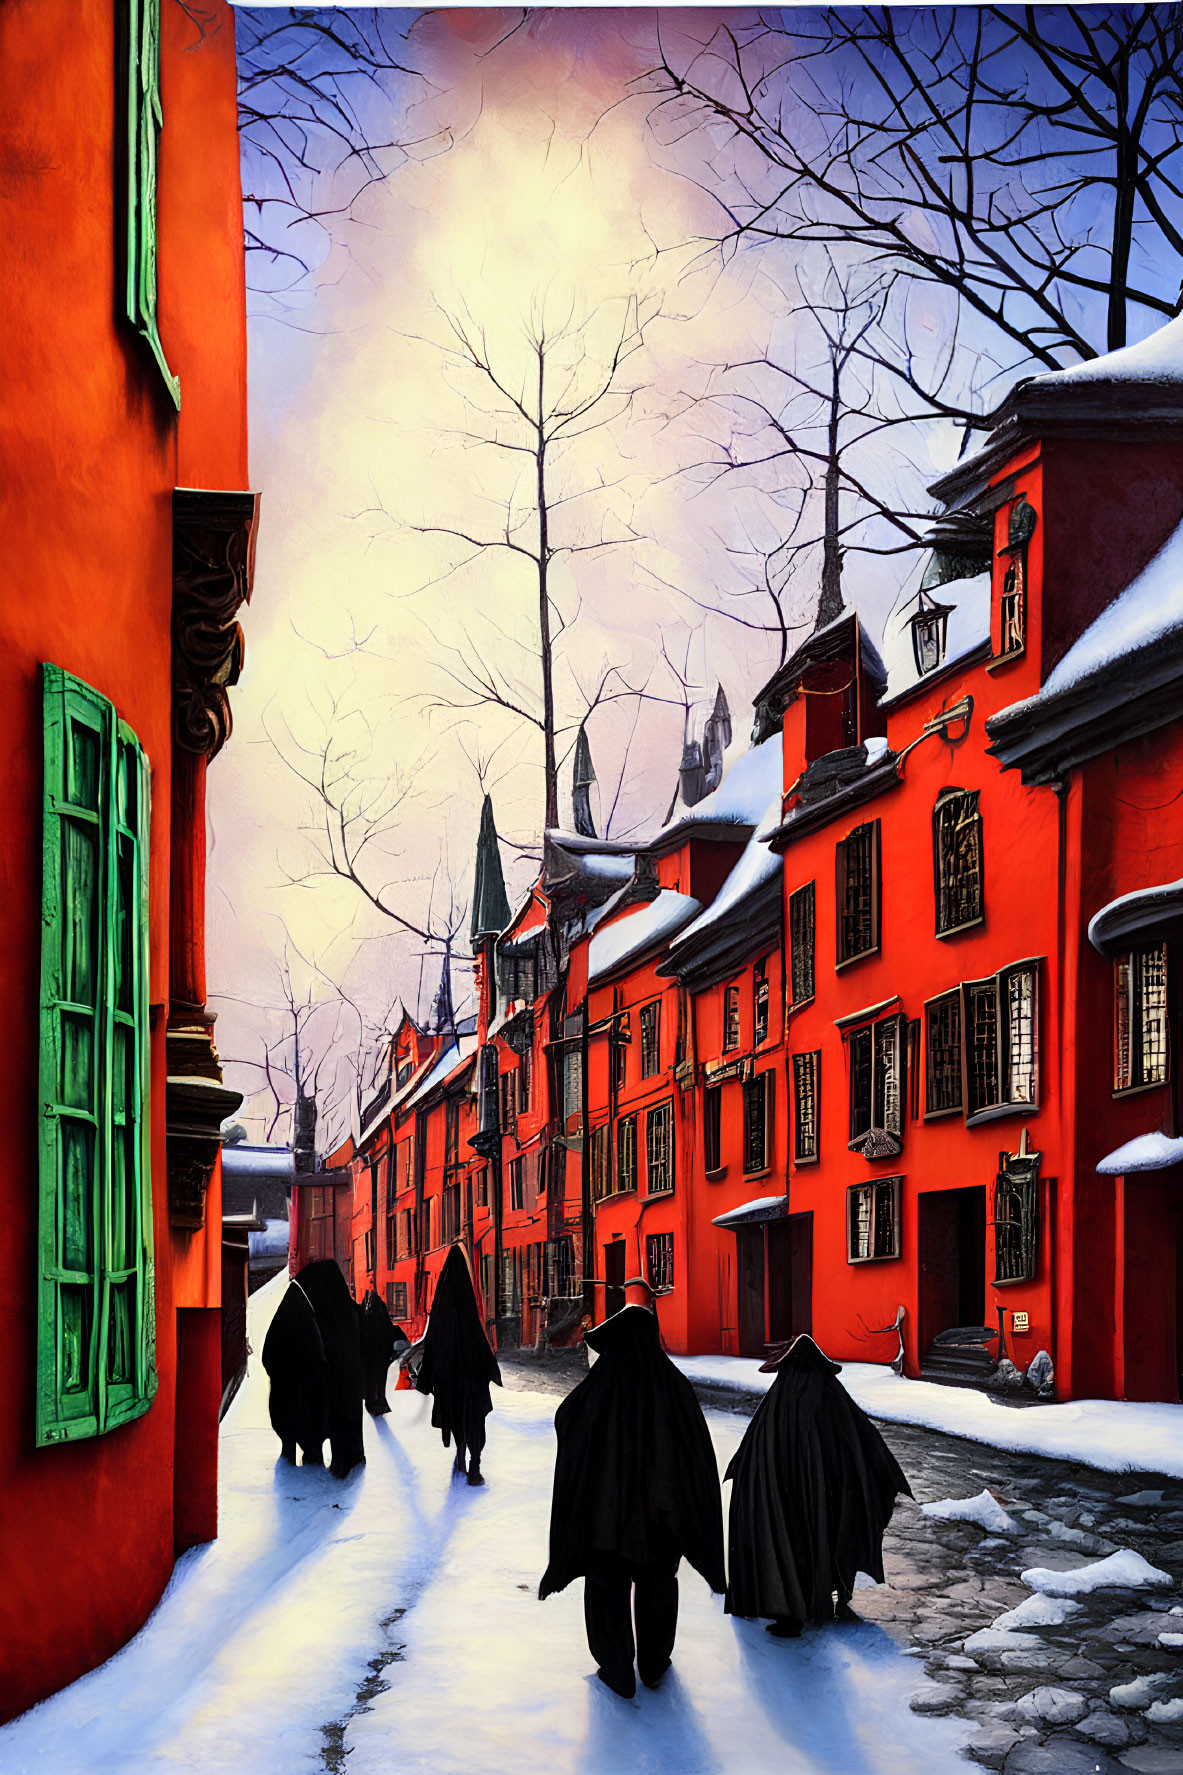 Snow-covered street with red buildings and figures in black cloaks